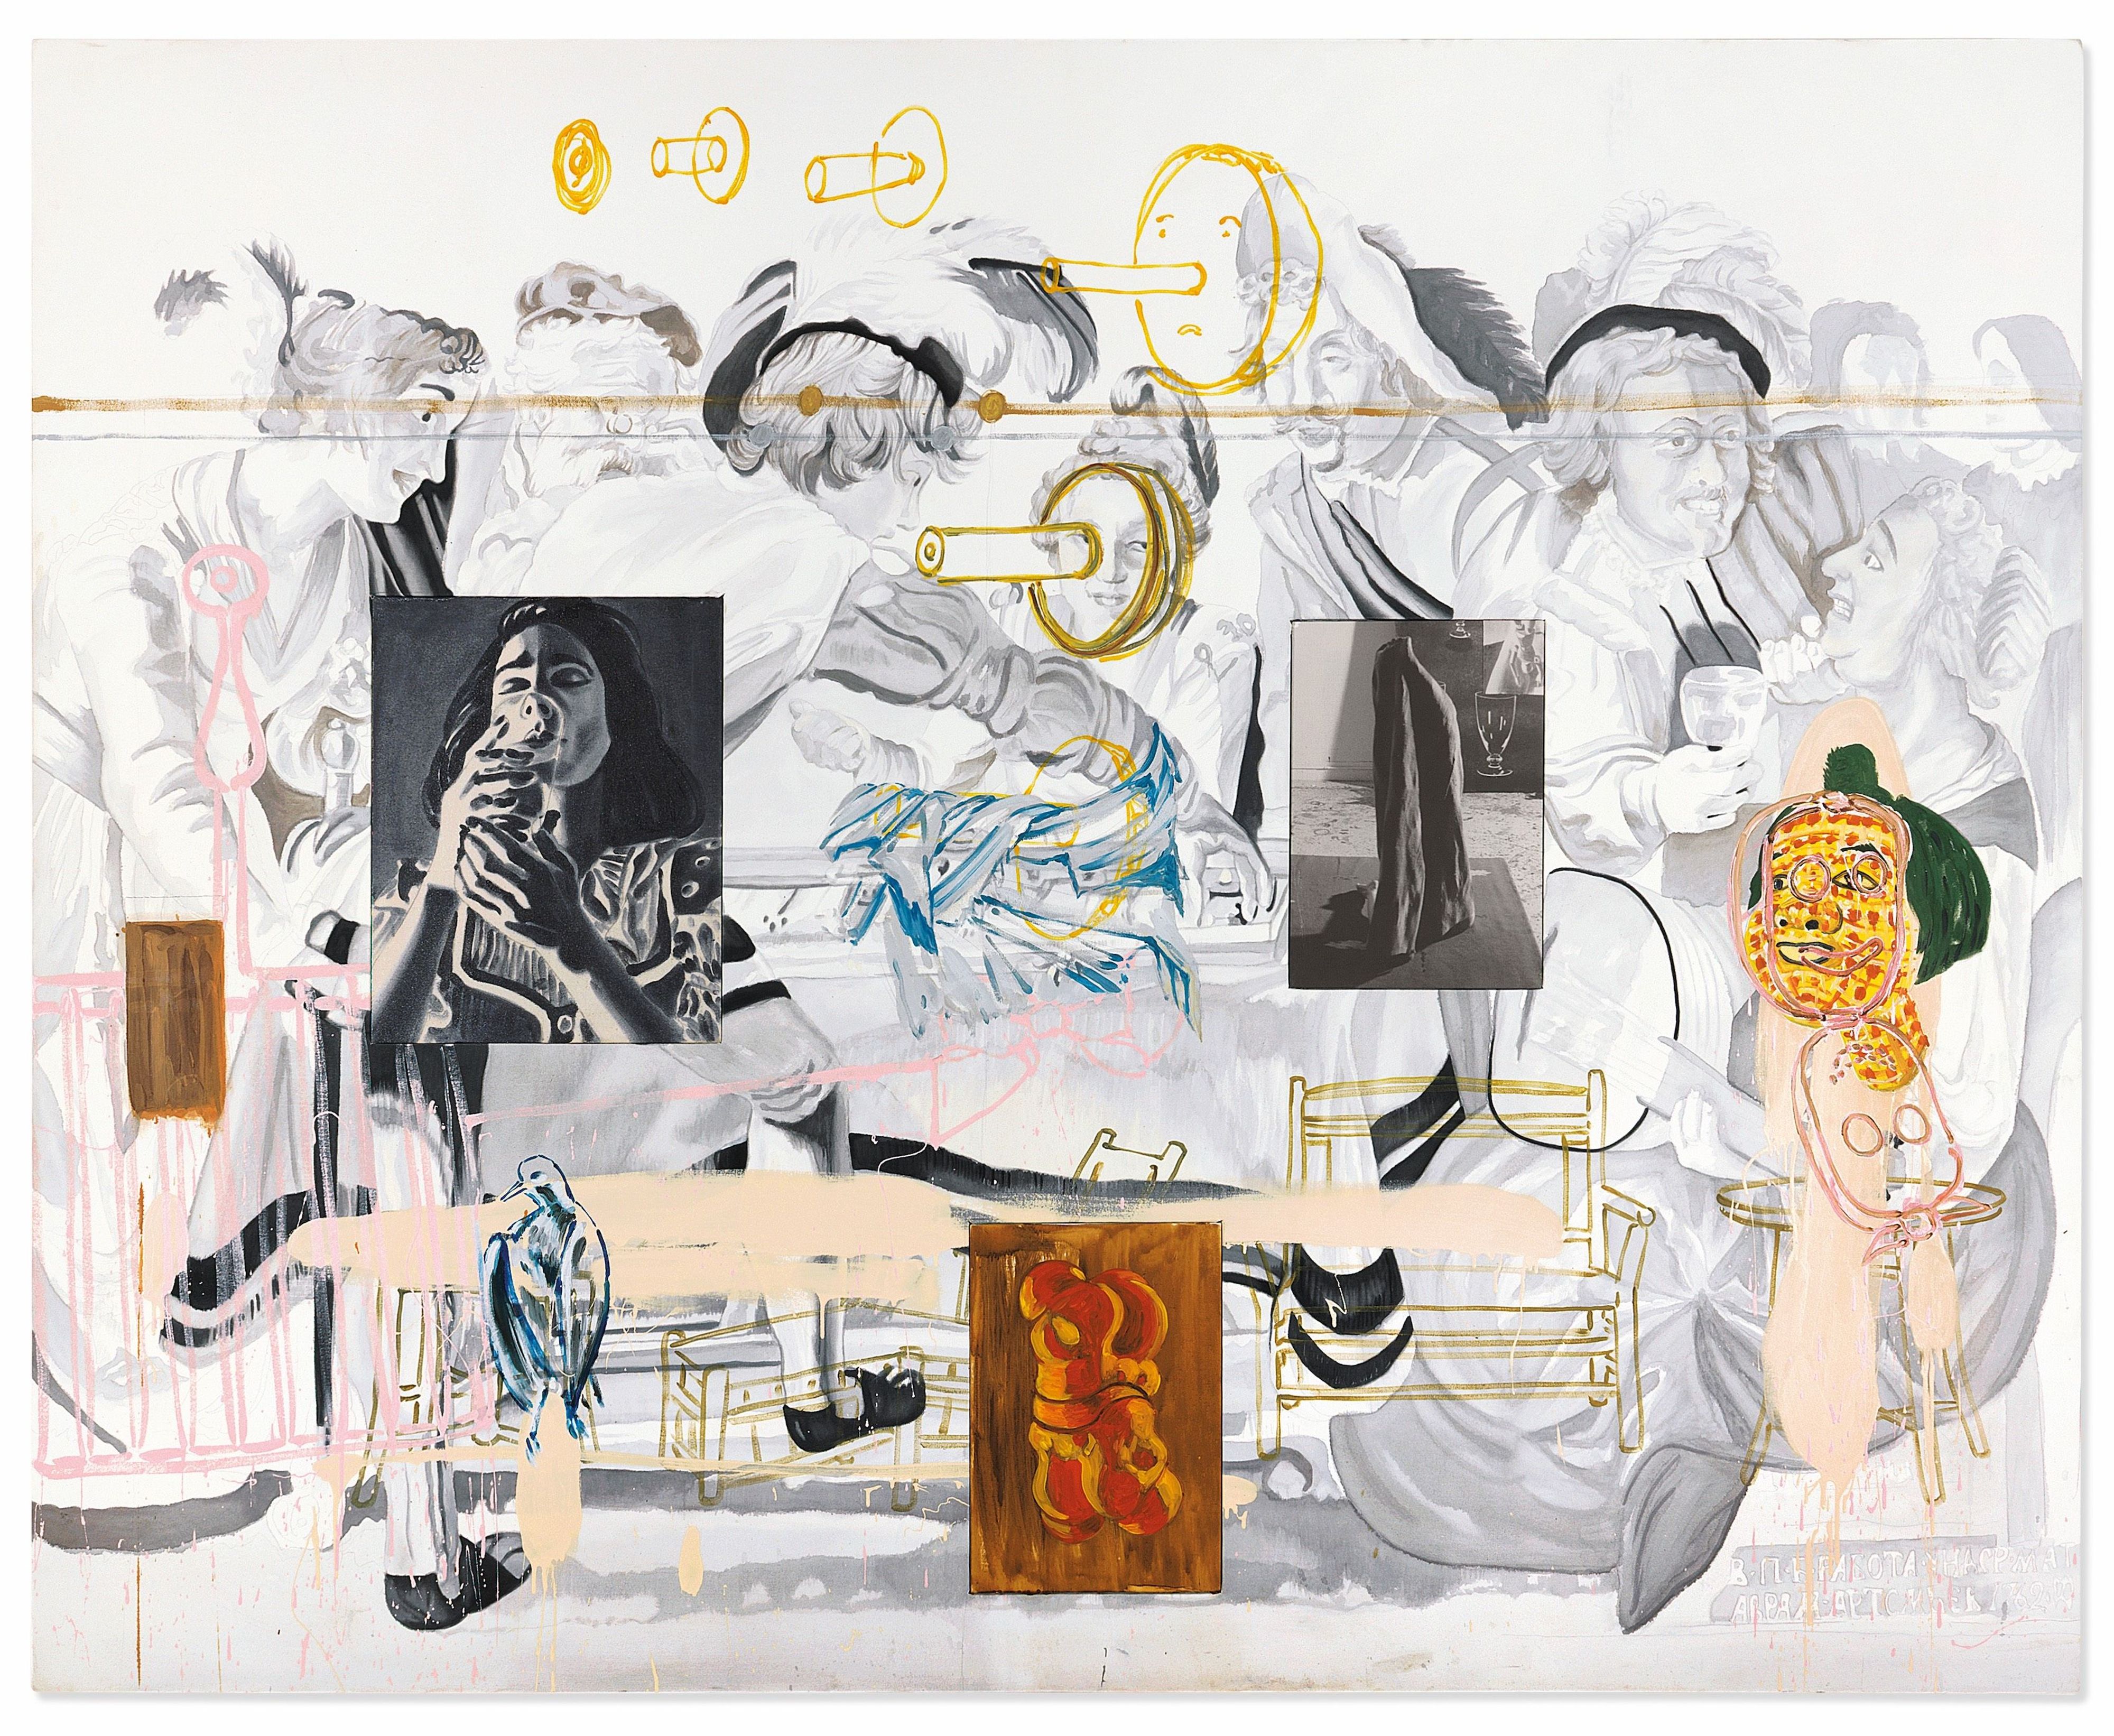 PIN–UP | THE INNER ARCHITECTURE OF DAVID SALLE